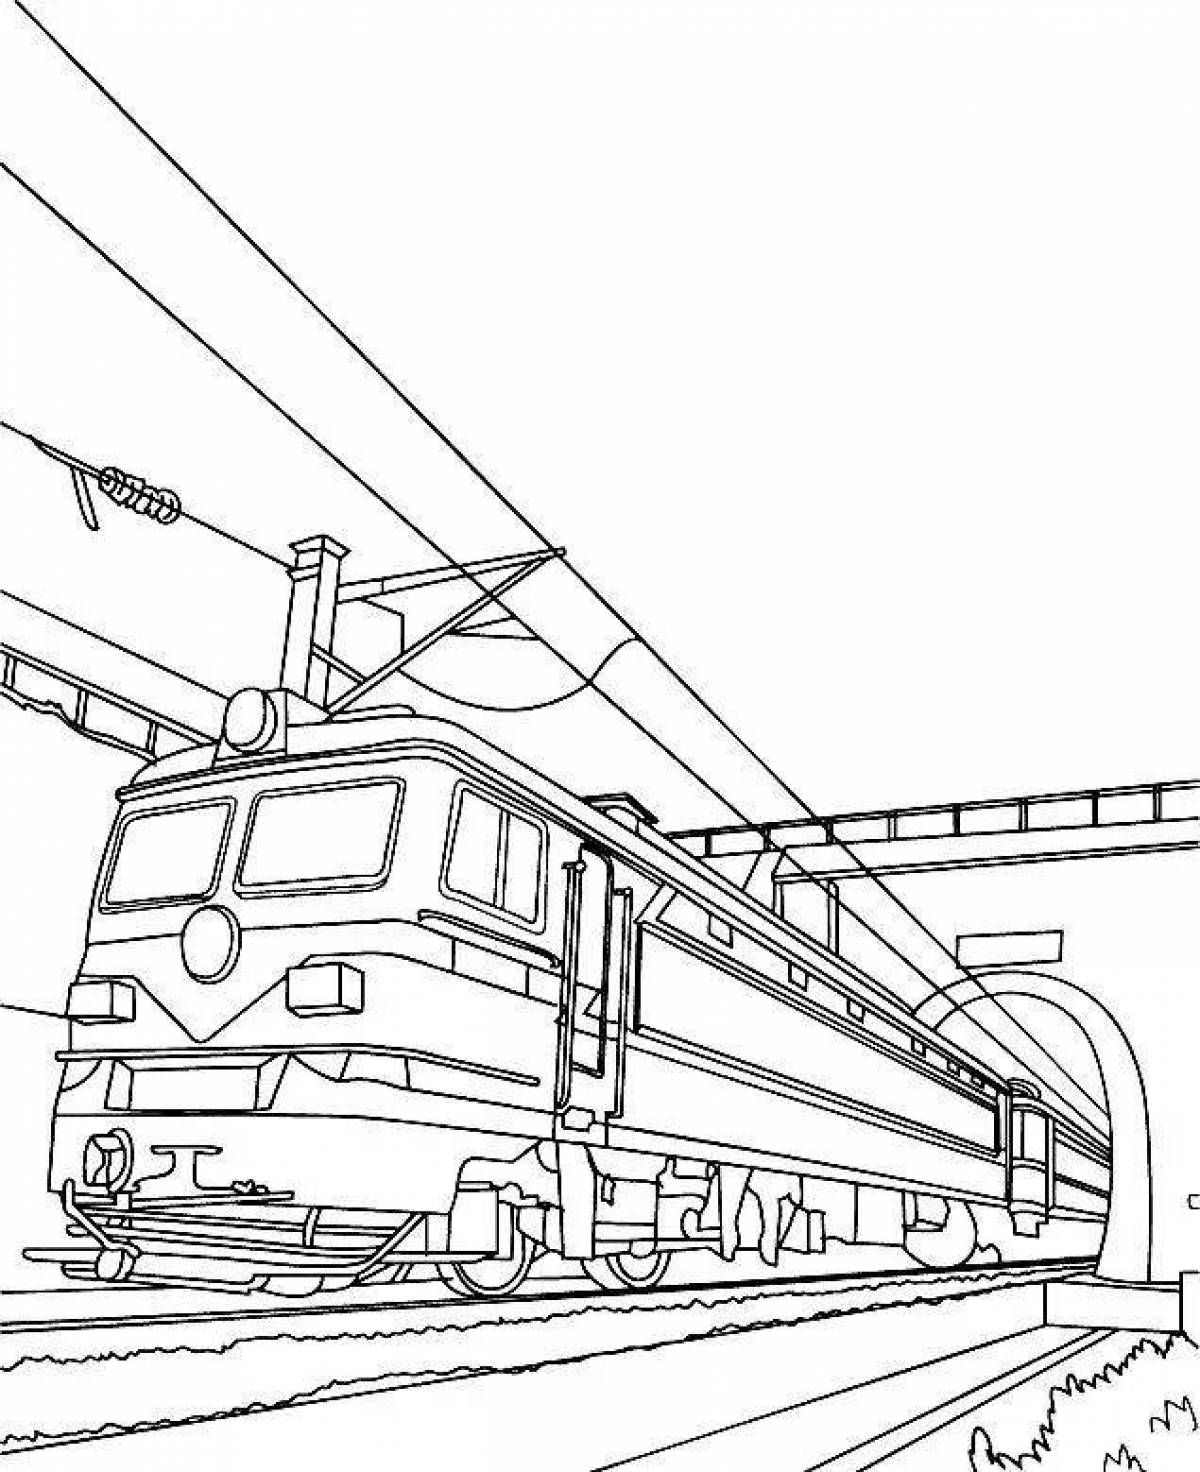 Fun coloring of a freight train